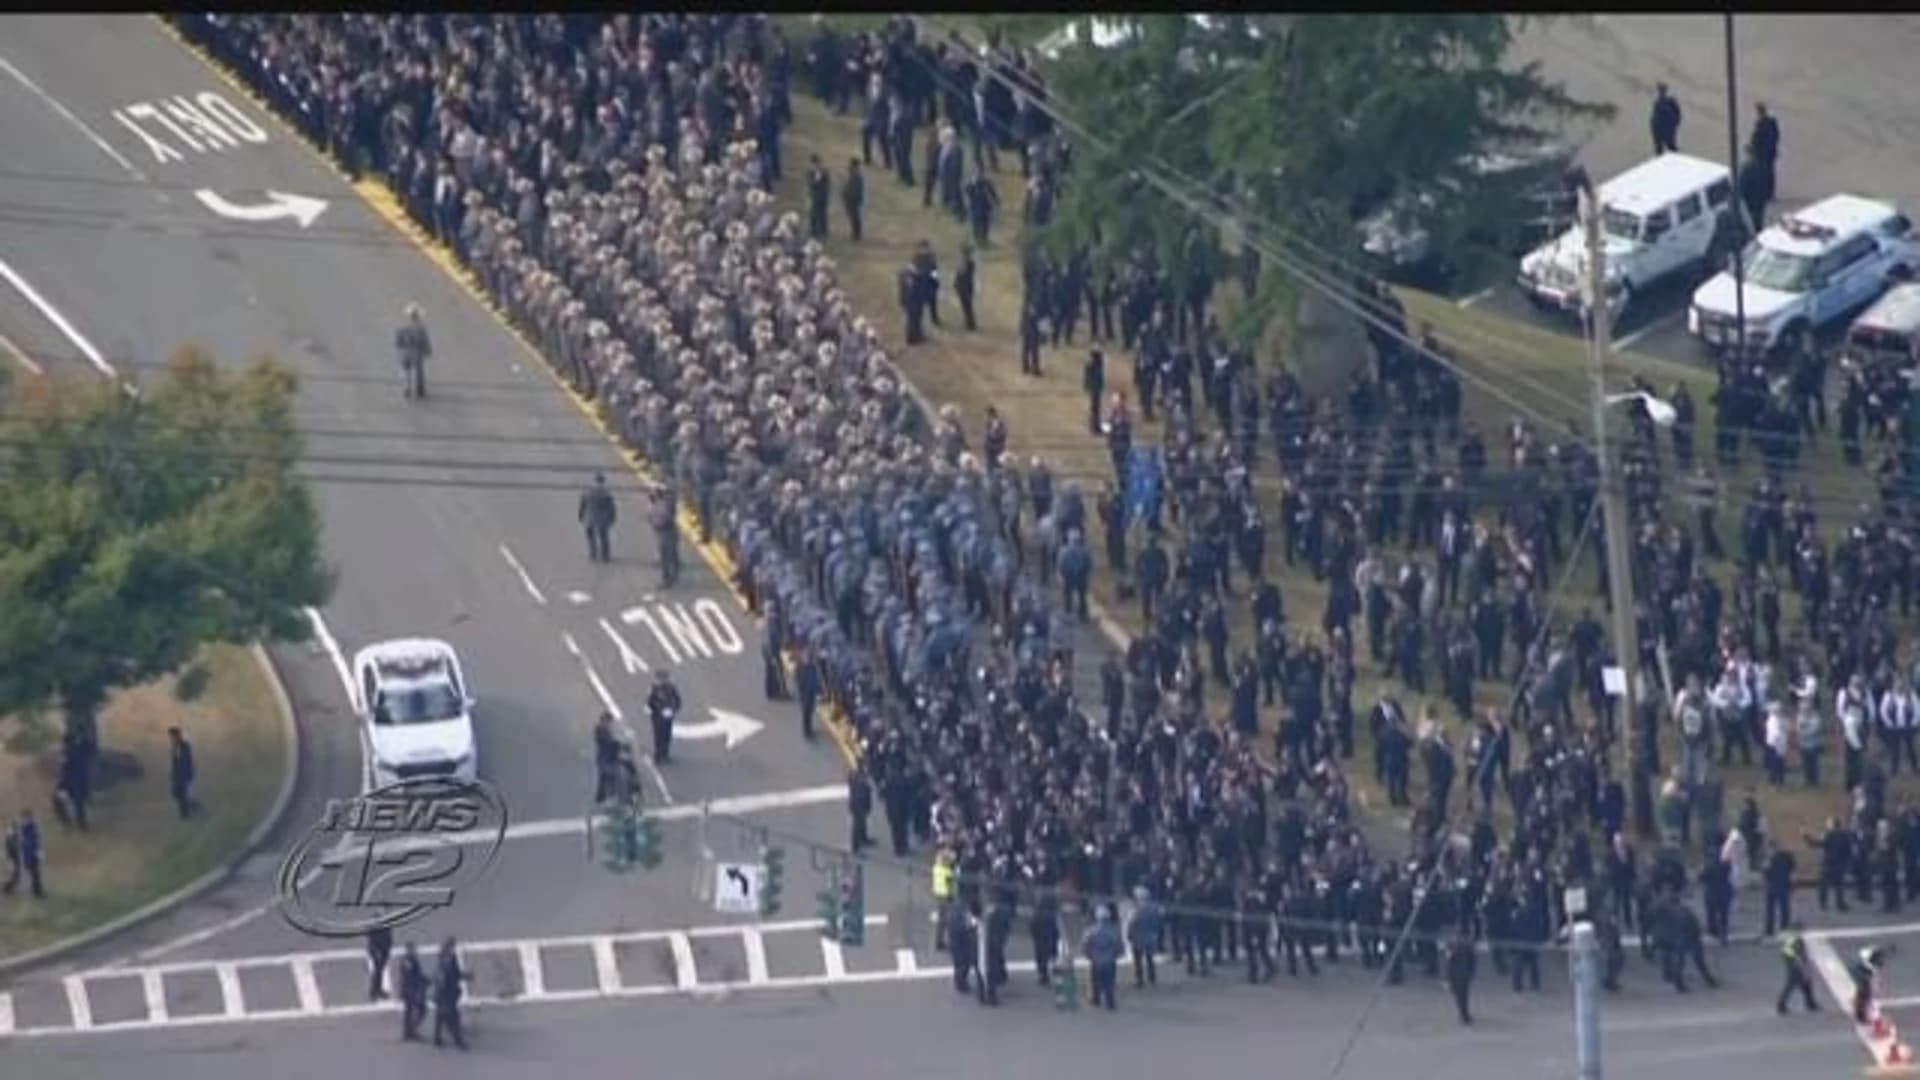 Thousands attend funeral Mass for NYPD Detective Brian Mulkeen